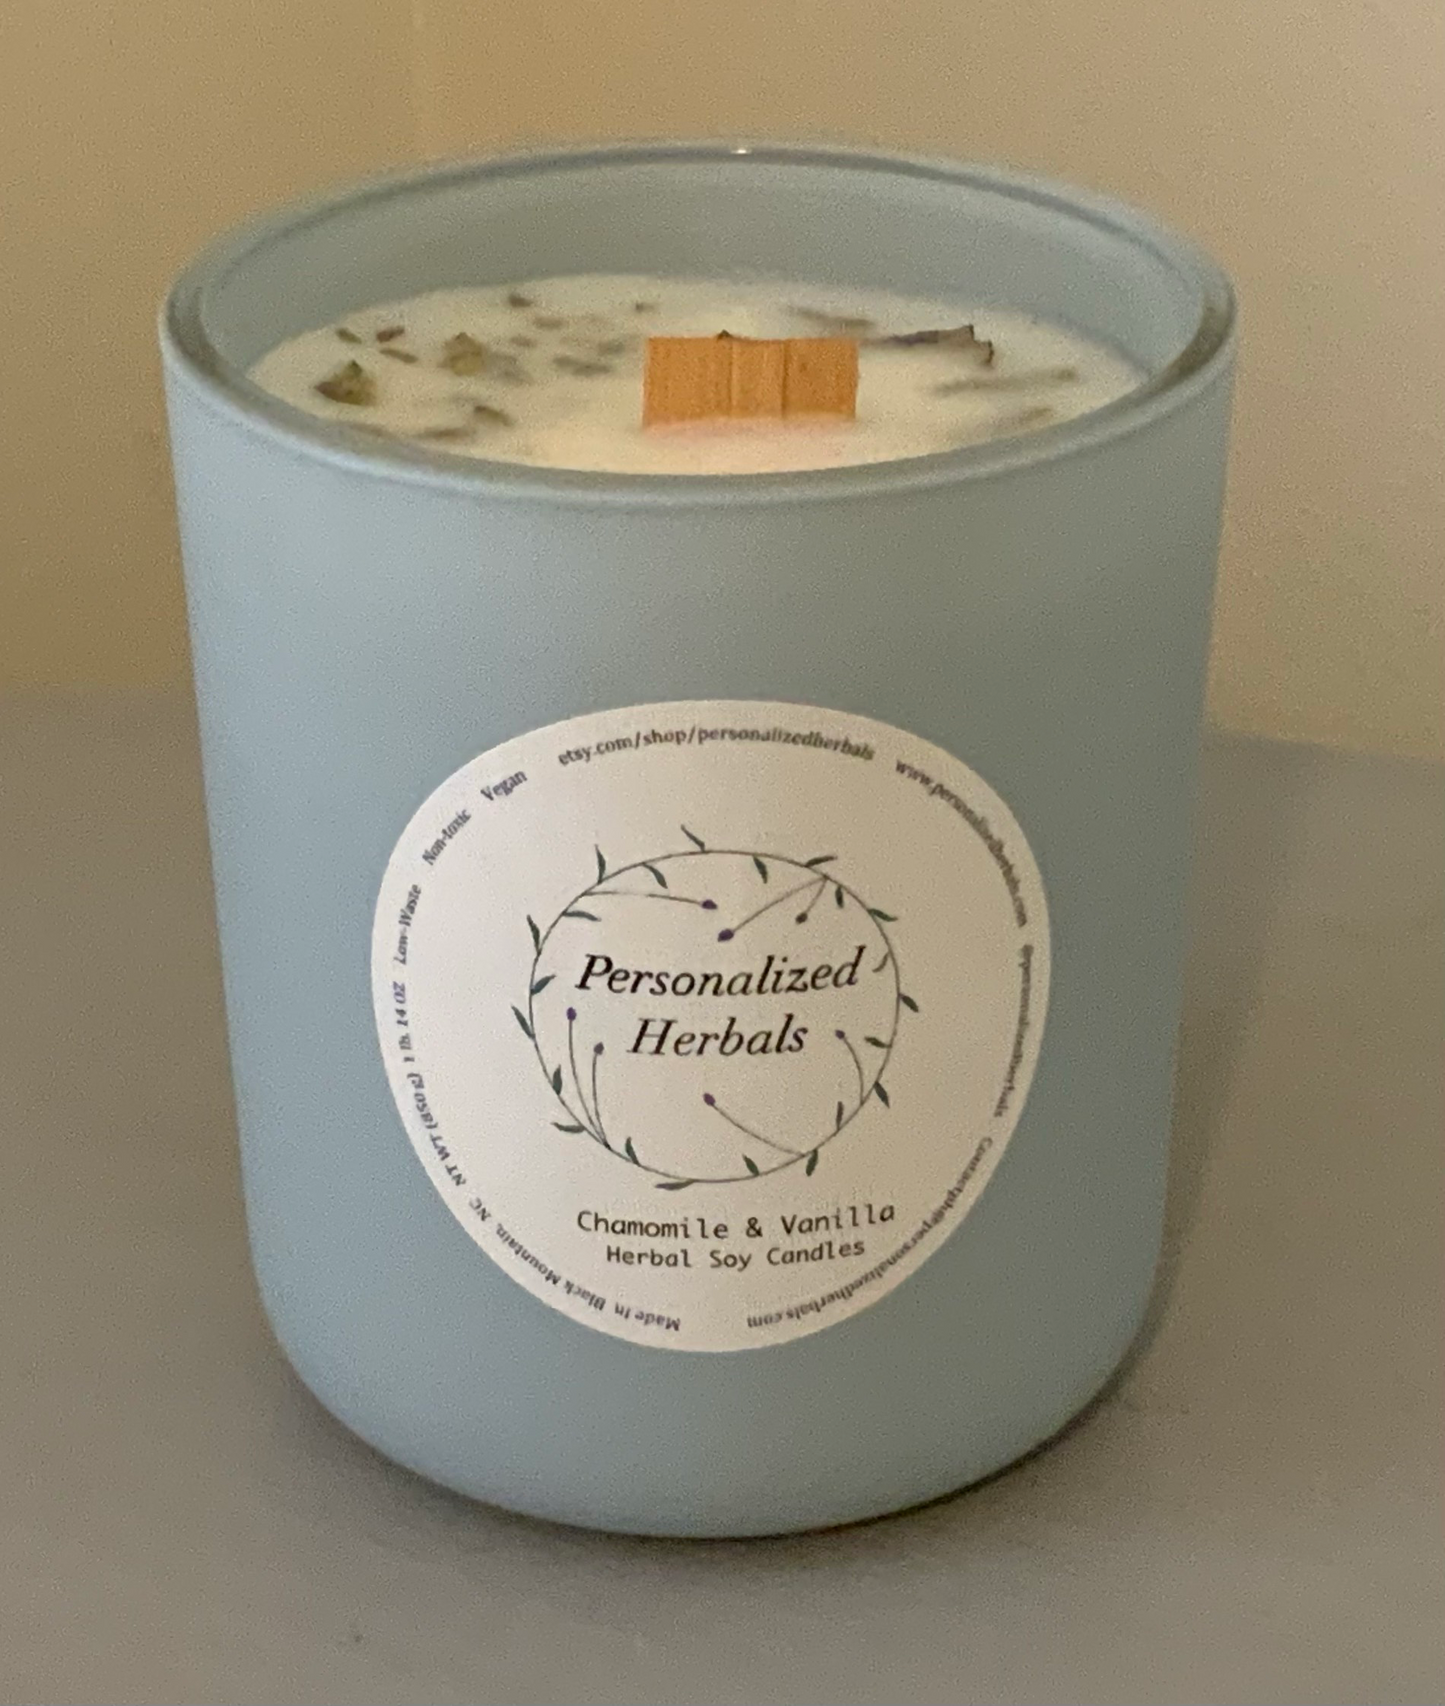 Chamomile & Vanilla Herbal Soy Candle